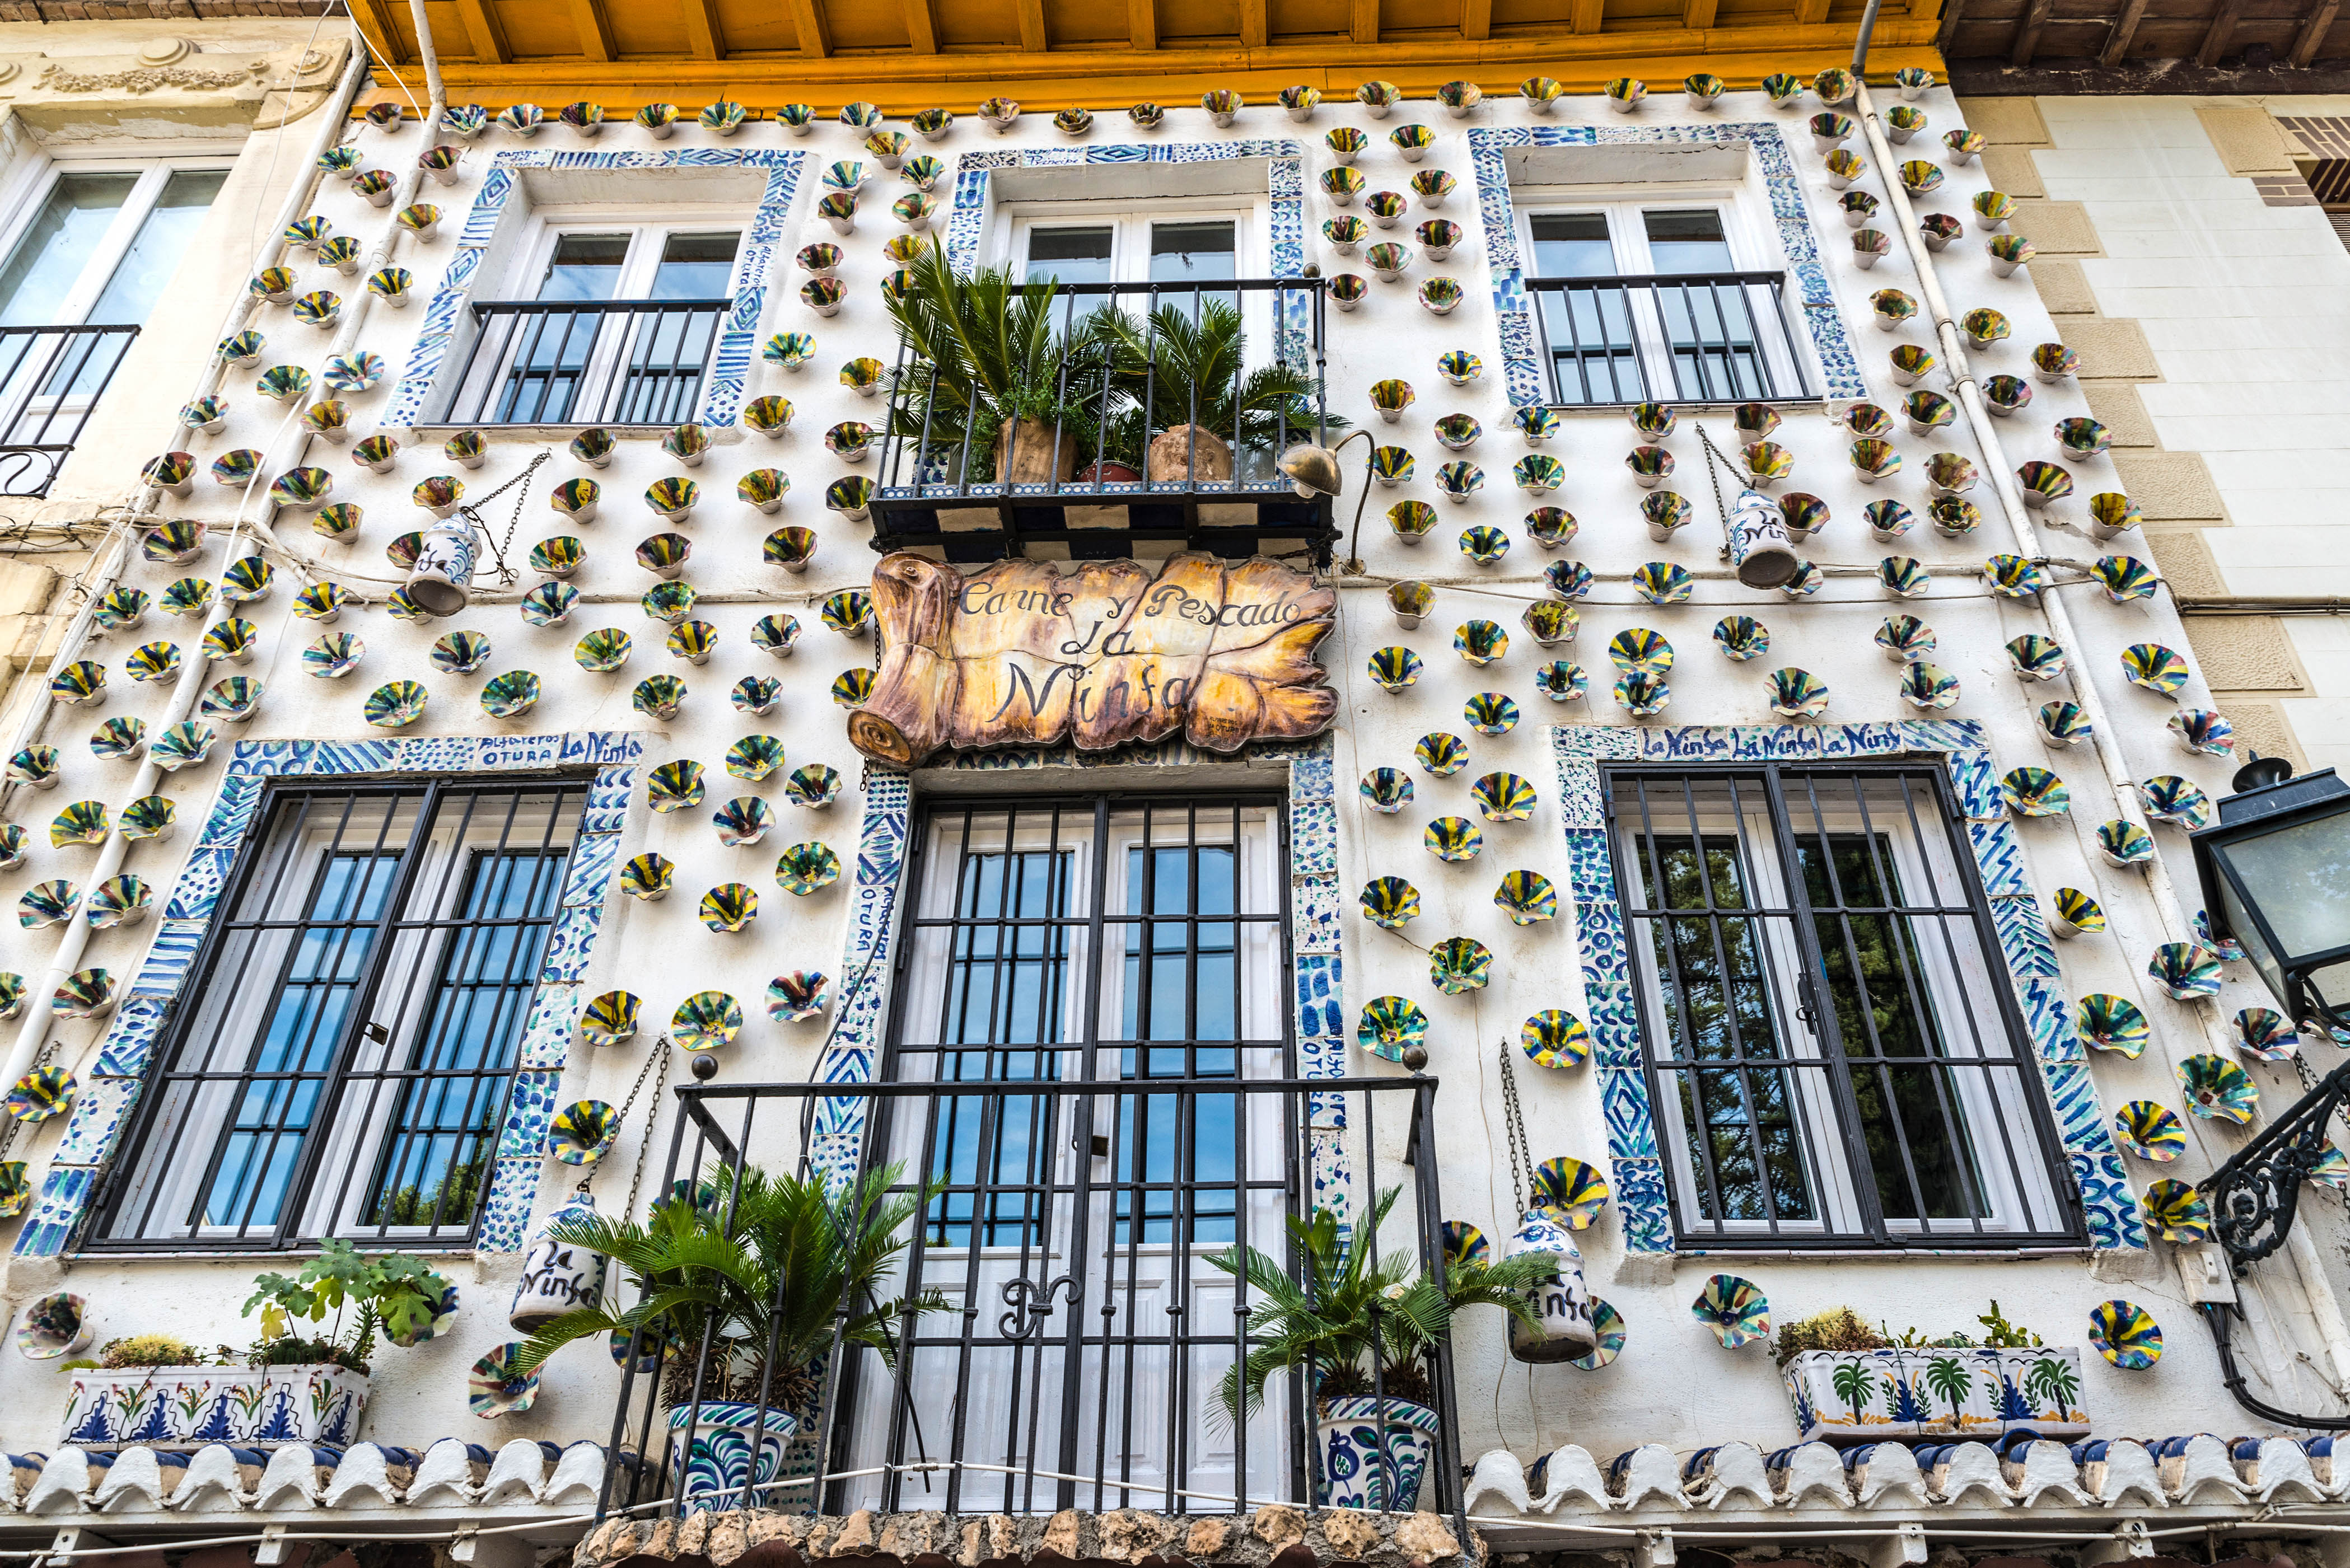 Granada, Spain - August 10, 2015: Facade of a restaurant decorated with painted vases in the old town of Granada, Andalusia, Spain.